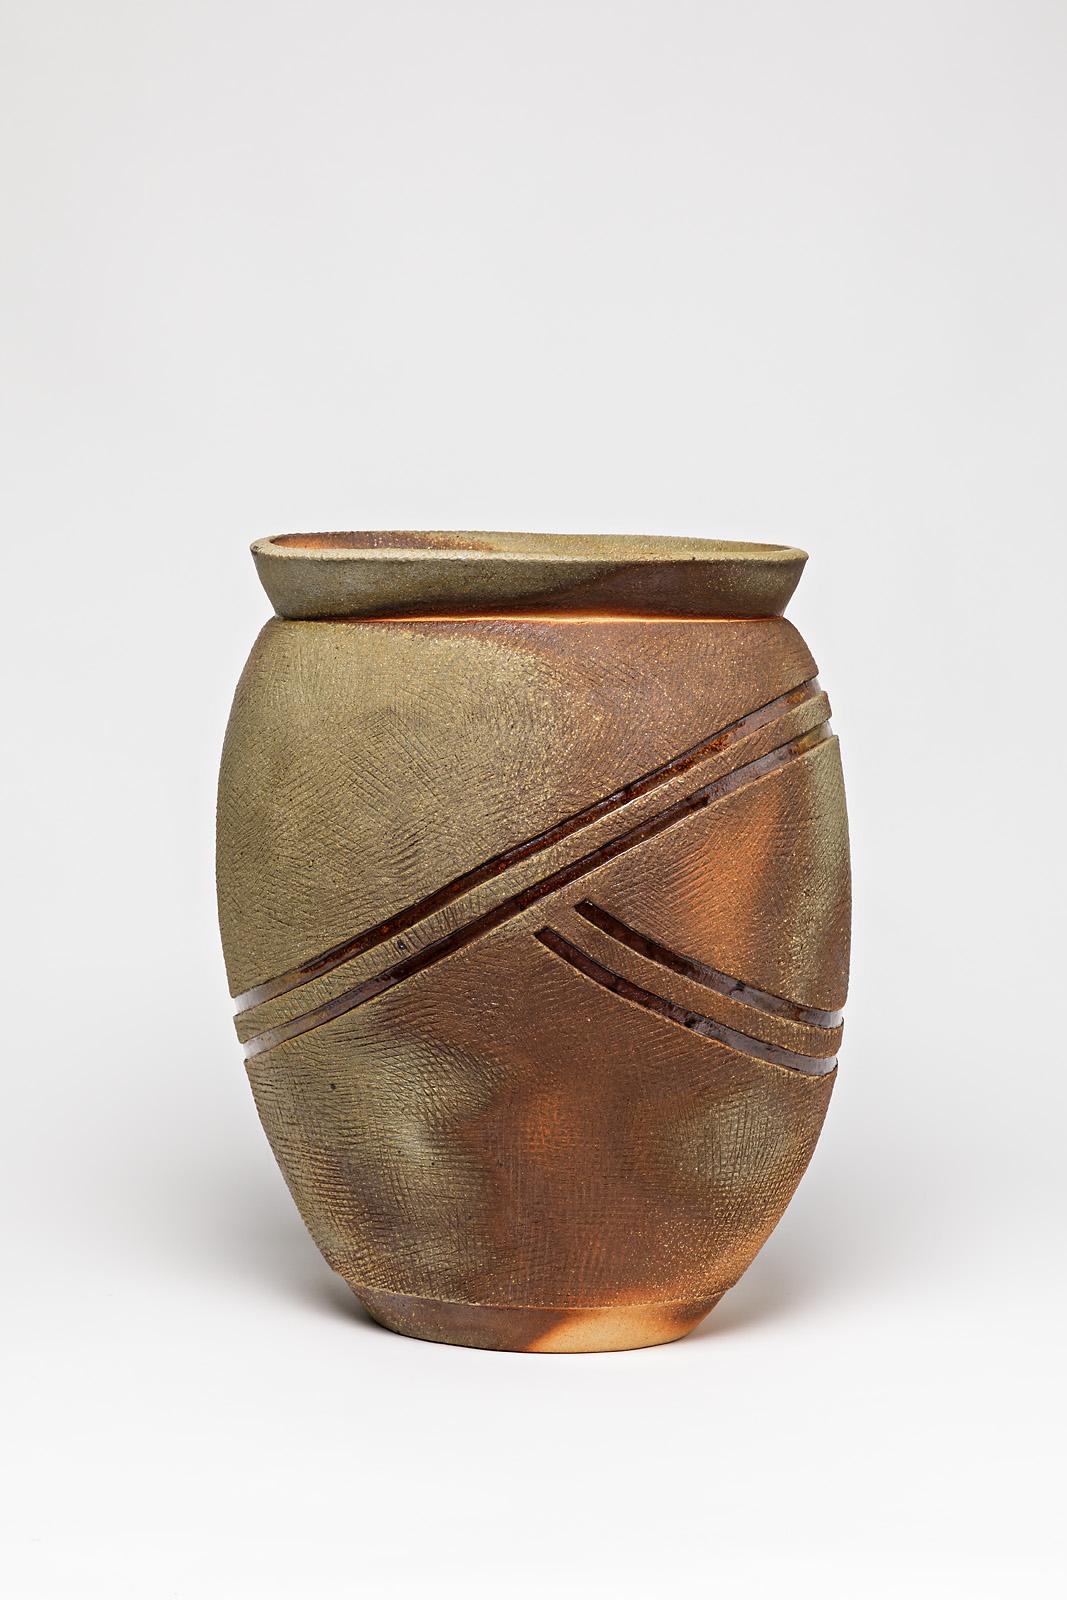 Ceramic Vase by Guieba, Signed, 1980-1990 In Excellent Condition For Sale In Saint-Ouen, FR